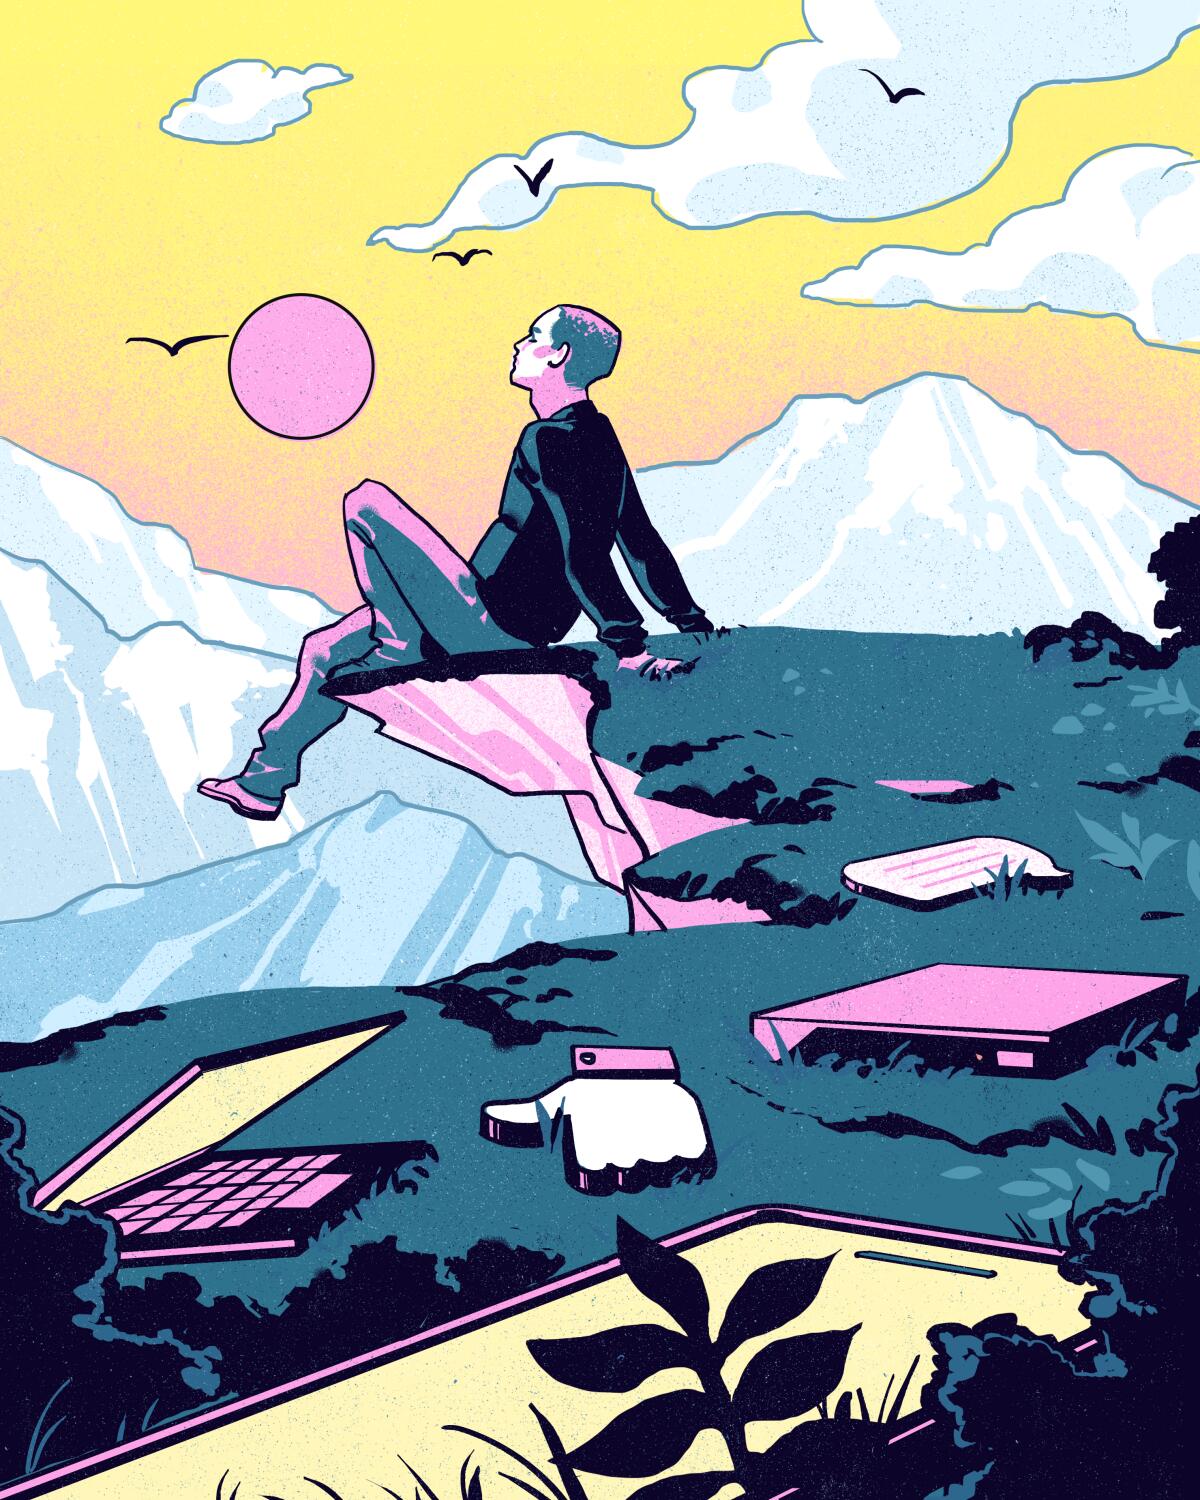 An illustration of a human looking out toward a mountainous landscape.